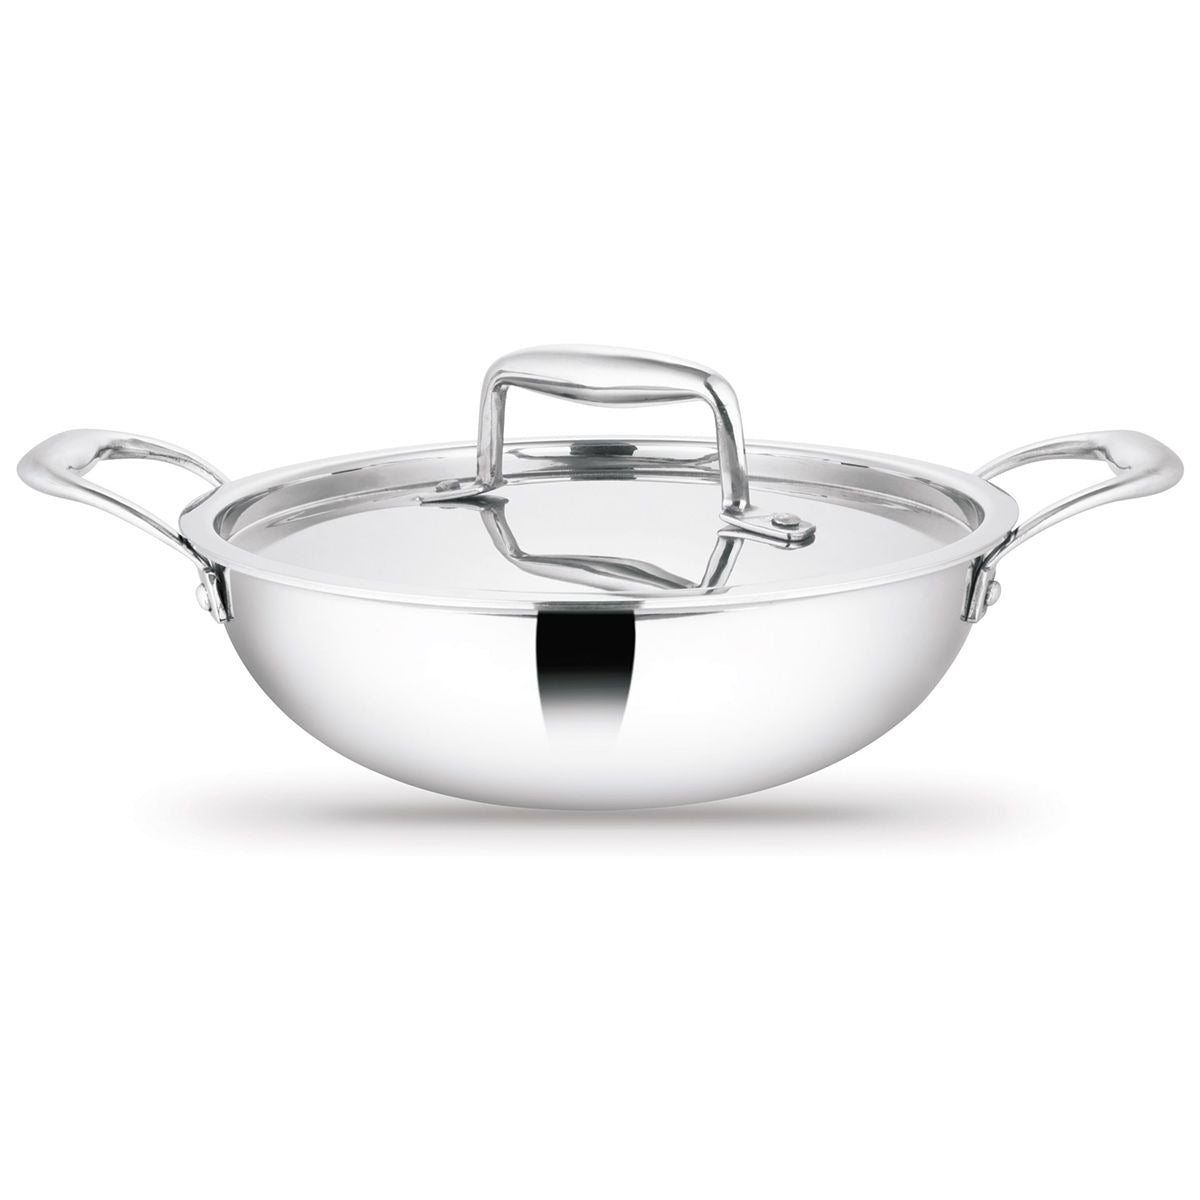 Artista Triply Stainless Steel Shallow Kadhai With Lid| Silver (Induction And Gas Stove Friendly)